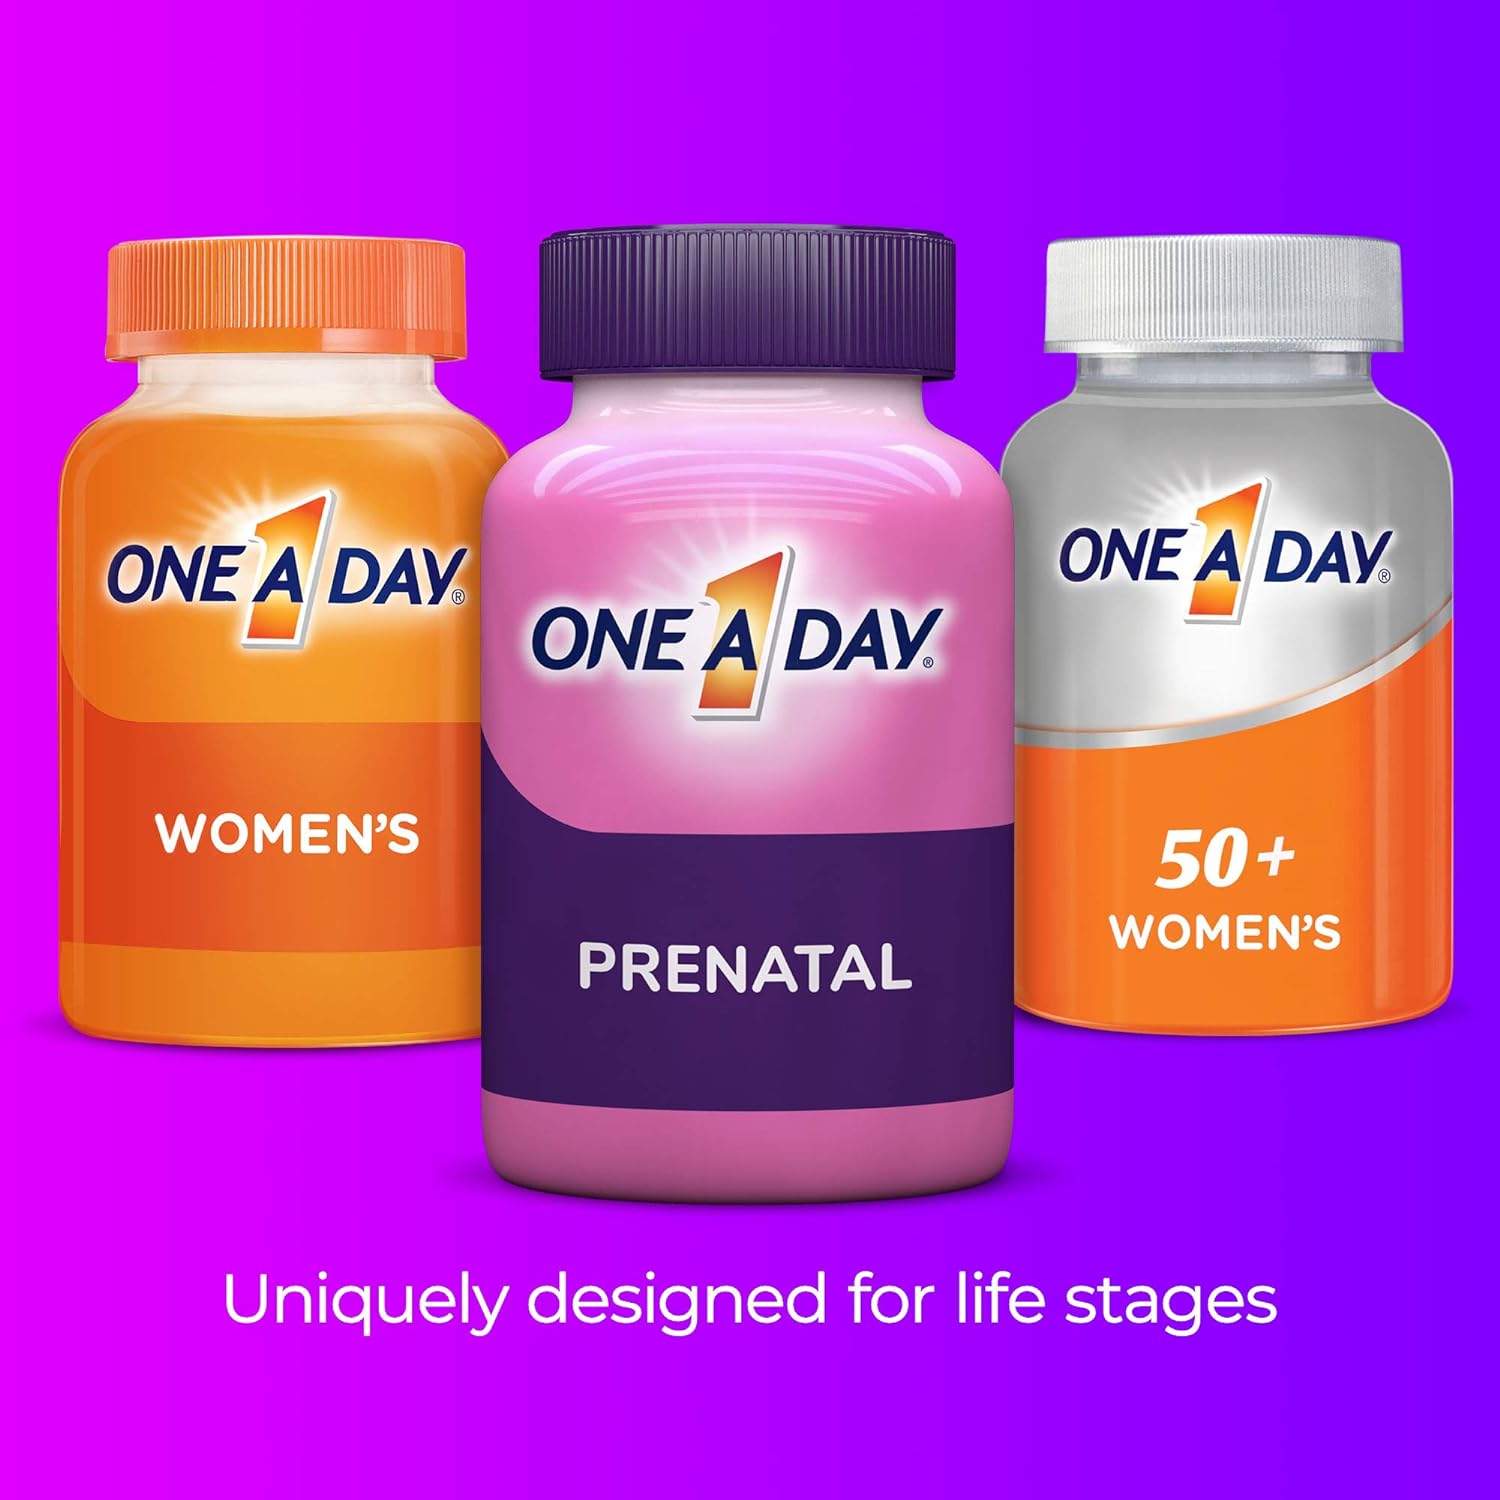 One A Day Mens  Womens Pre-Pregnancy Multivitamin Softgel including Vitamins A, Vitamin C, Vitamin D, B6, B12, Folic Acid  more, 30+30 Count, Supplement for Before, During, and Postnatal